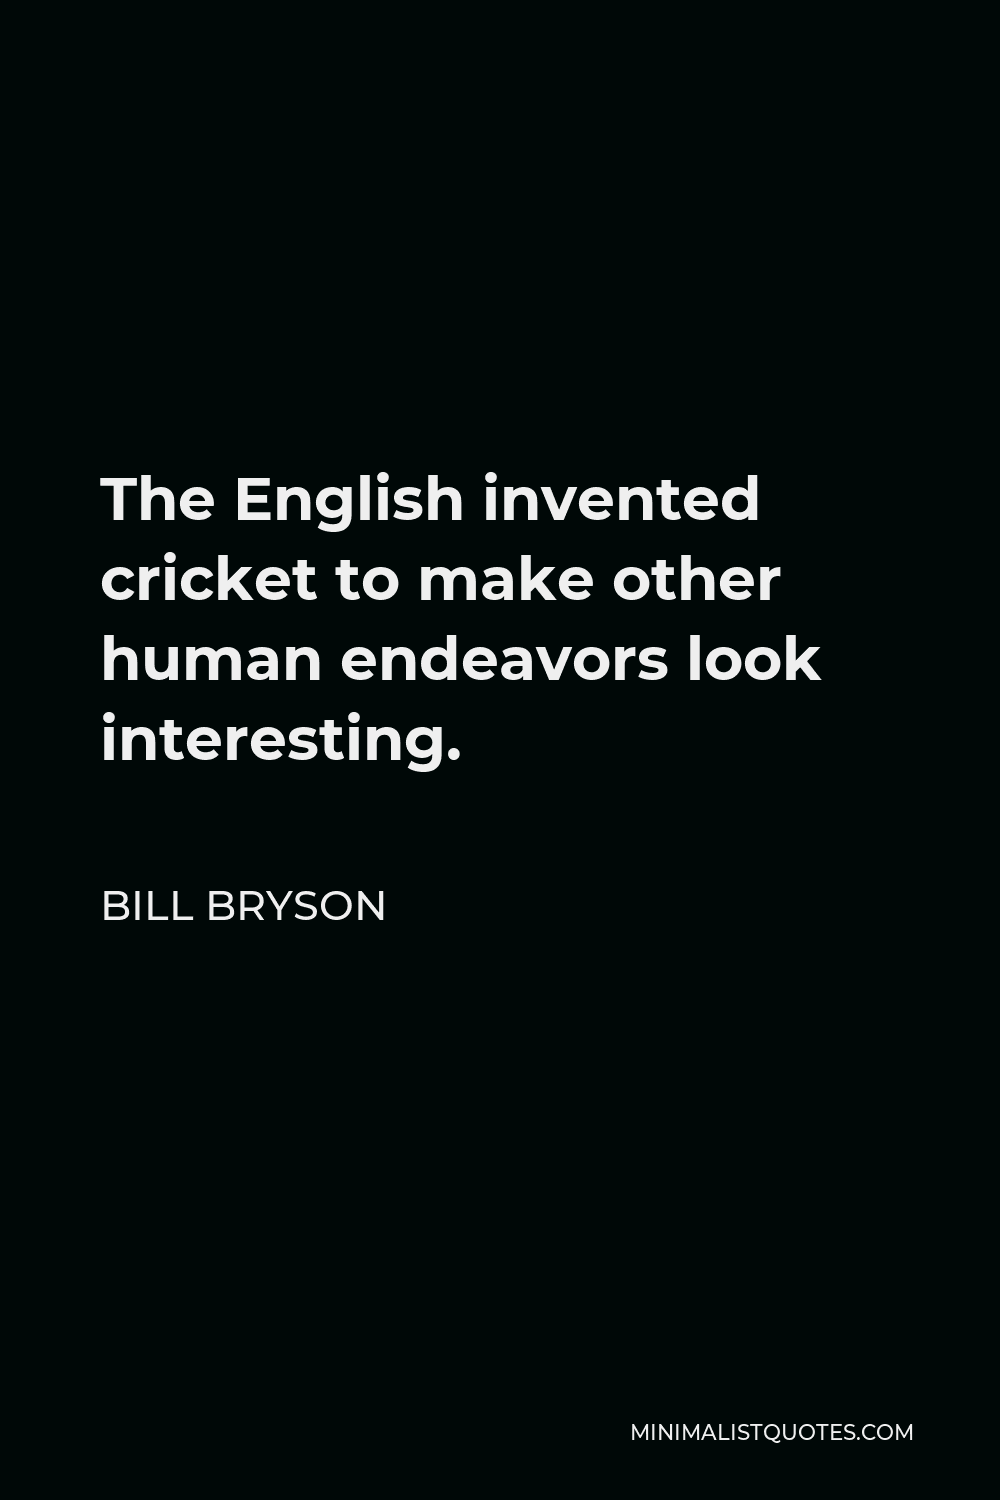 Bill Bryson Quote - The English invented cricket to make other human endeavors look interesting.